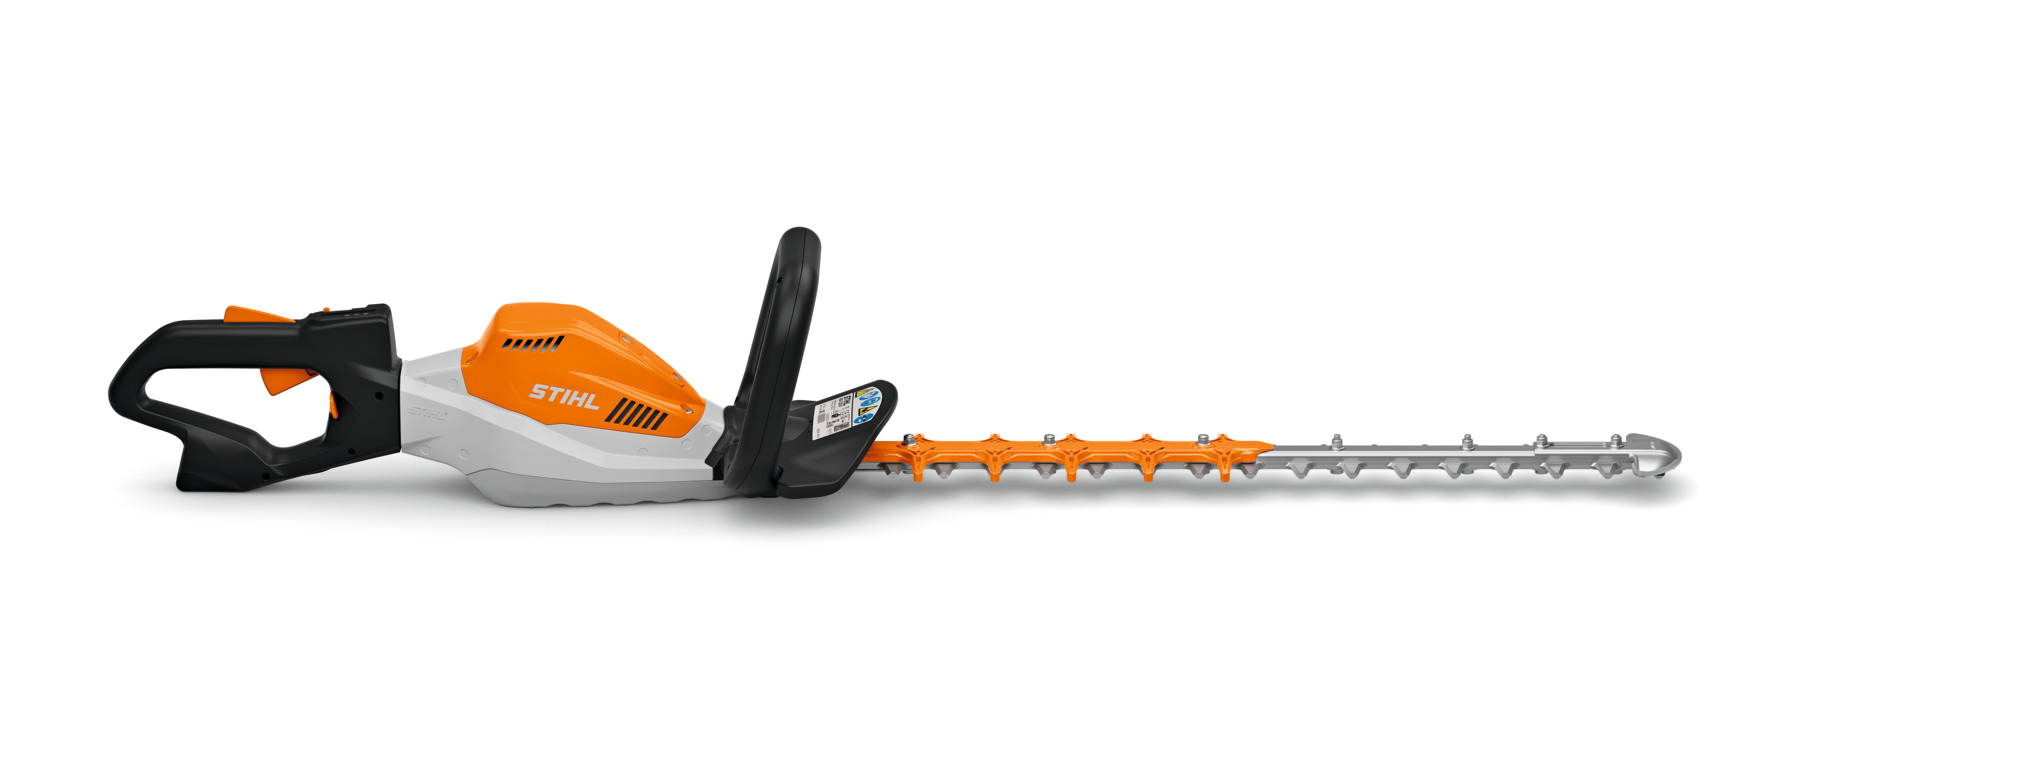 HSA 130 Cordless Hedge Trimmer - AP System